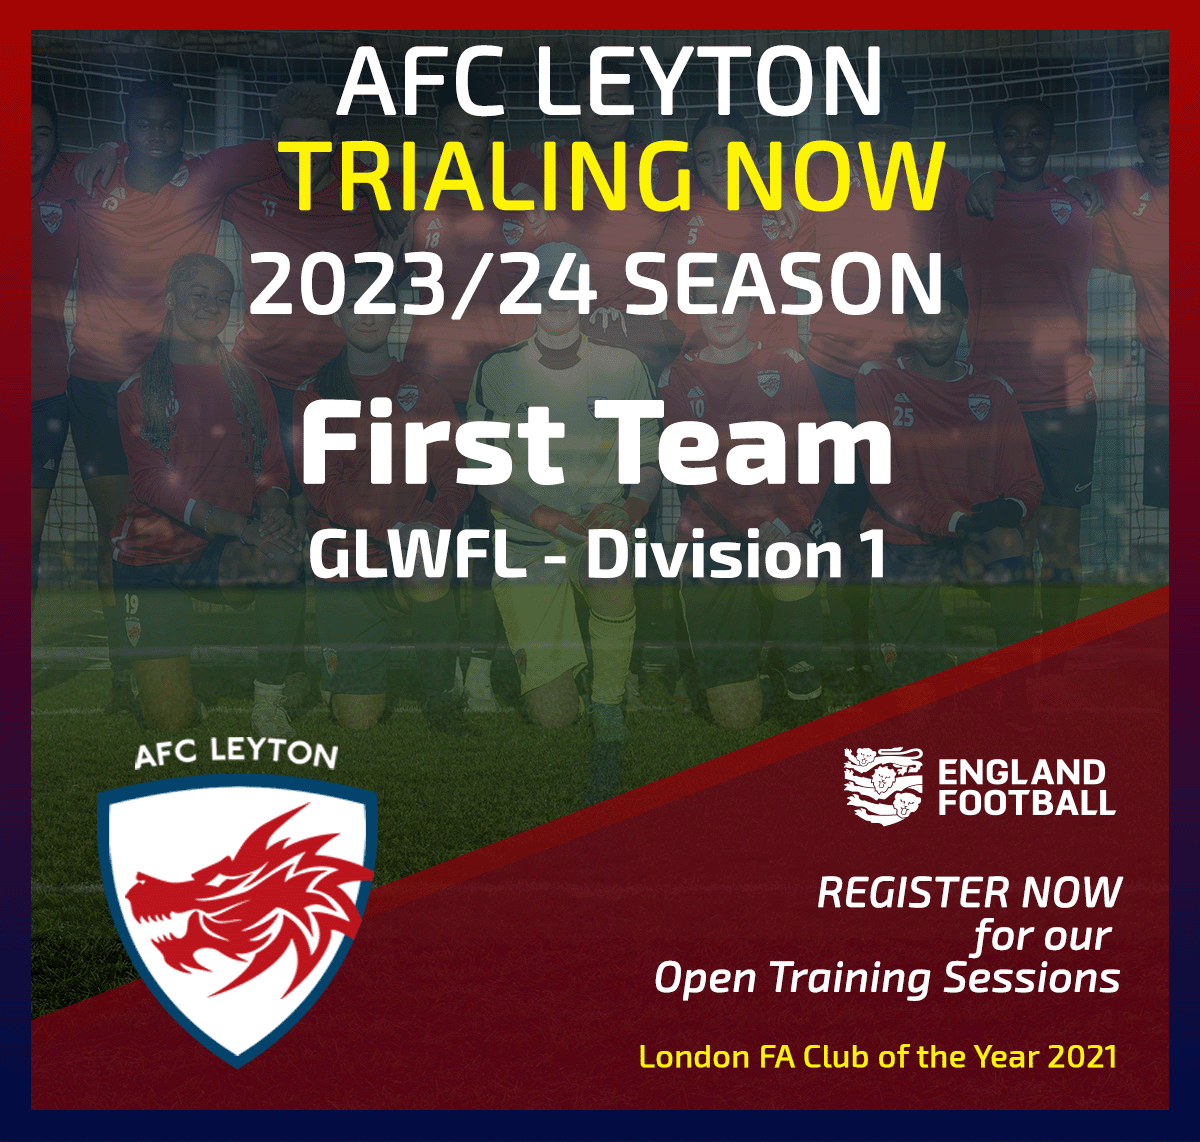 OPEN TRAINING - FIRST TEAM
We have open training for any women aged 16+ wishing to join us from next week: Tuesdays - 02/05, 09/05, 16/05, 23/05 & 30/05.  Arrival 8pm.  Sign up coaching@afcleyton.co.uk
#Squadbooster #FootballTrials #Womensfootball #LondonFootball